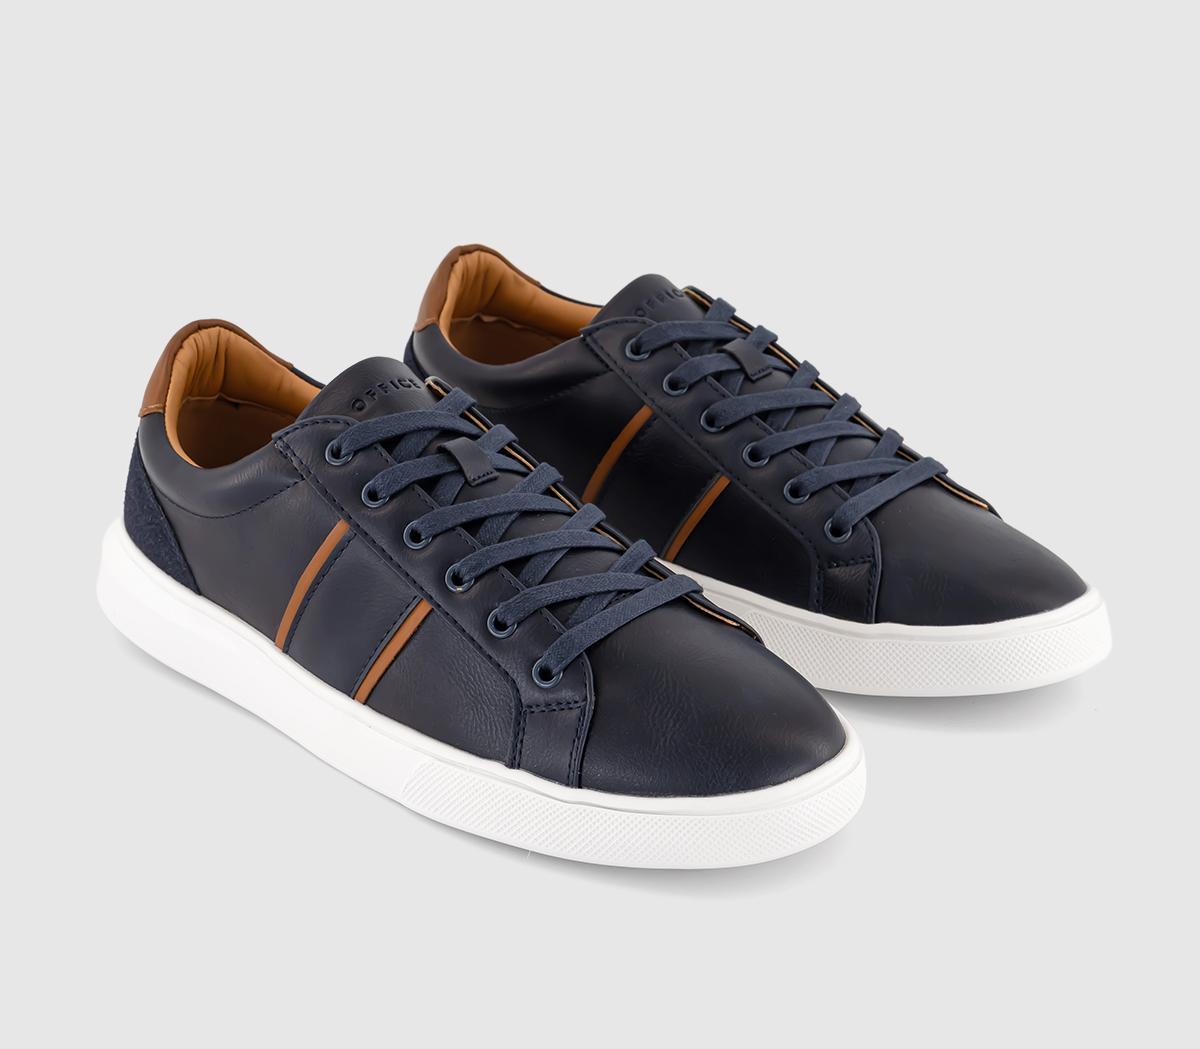 OFFICE Mens Cade Side Stripe Trainers Navy Blue, 7